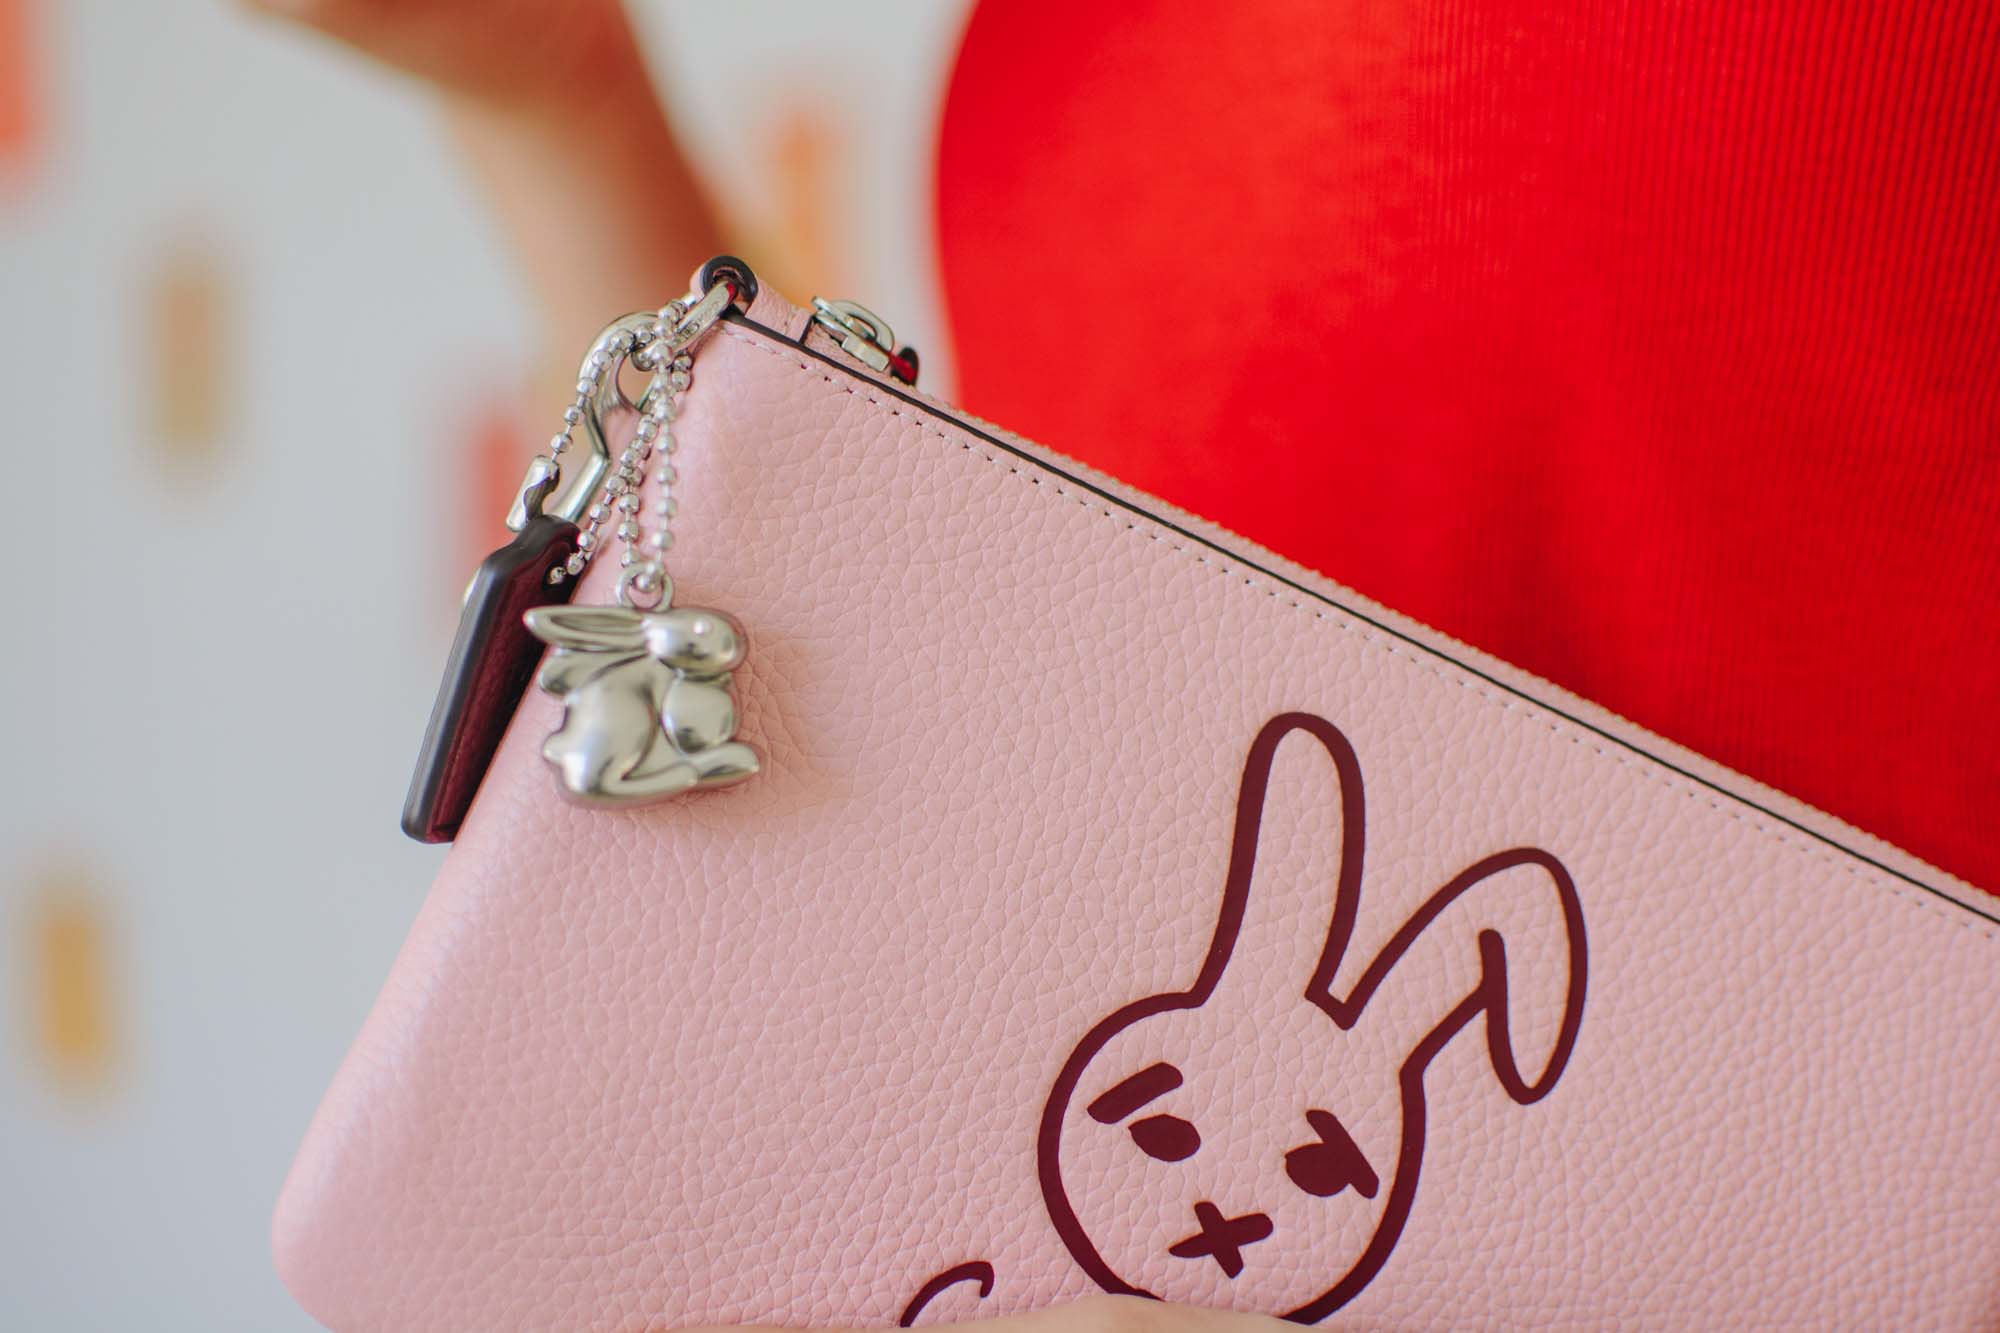 Scottsdale Fashion Square is gifting a 2023 Year of the Rabbit Wristlet from Coach's Lunar New Year collection.